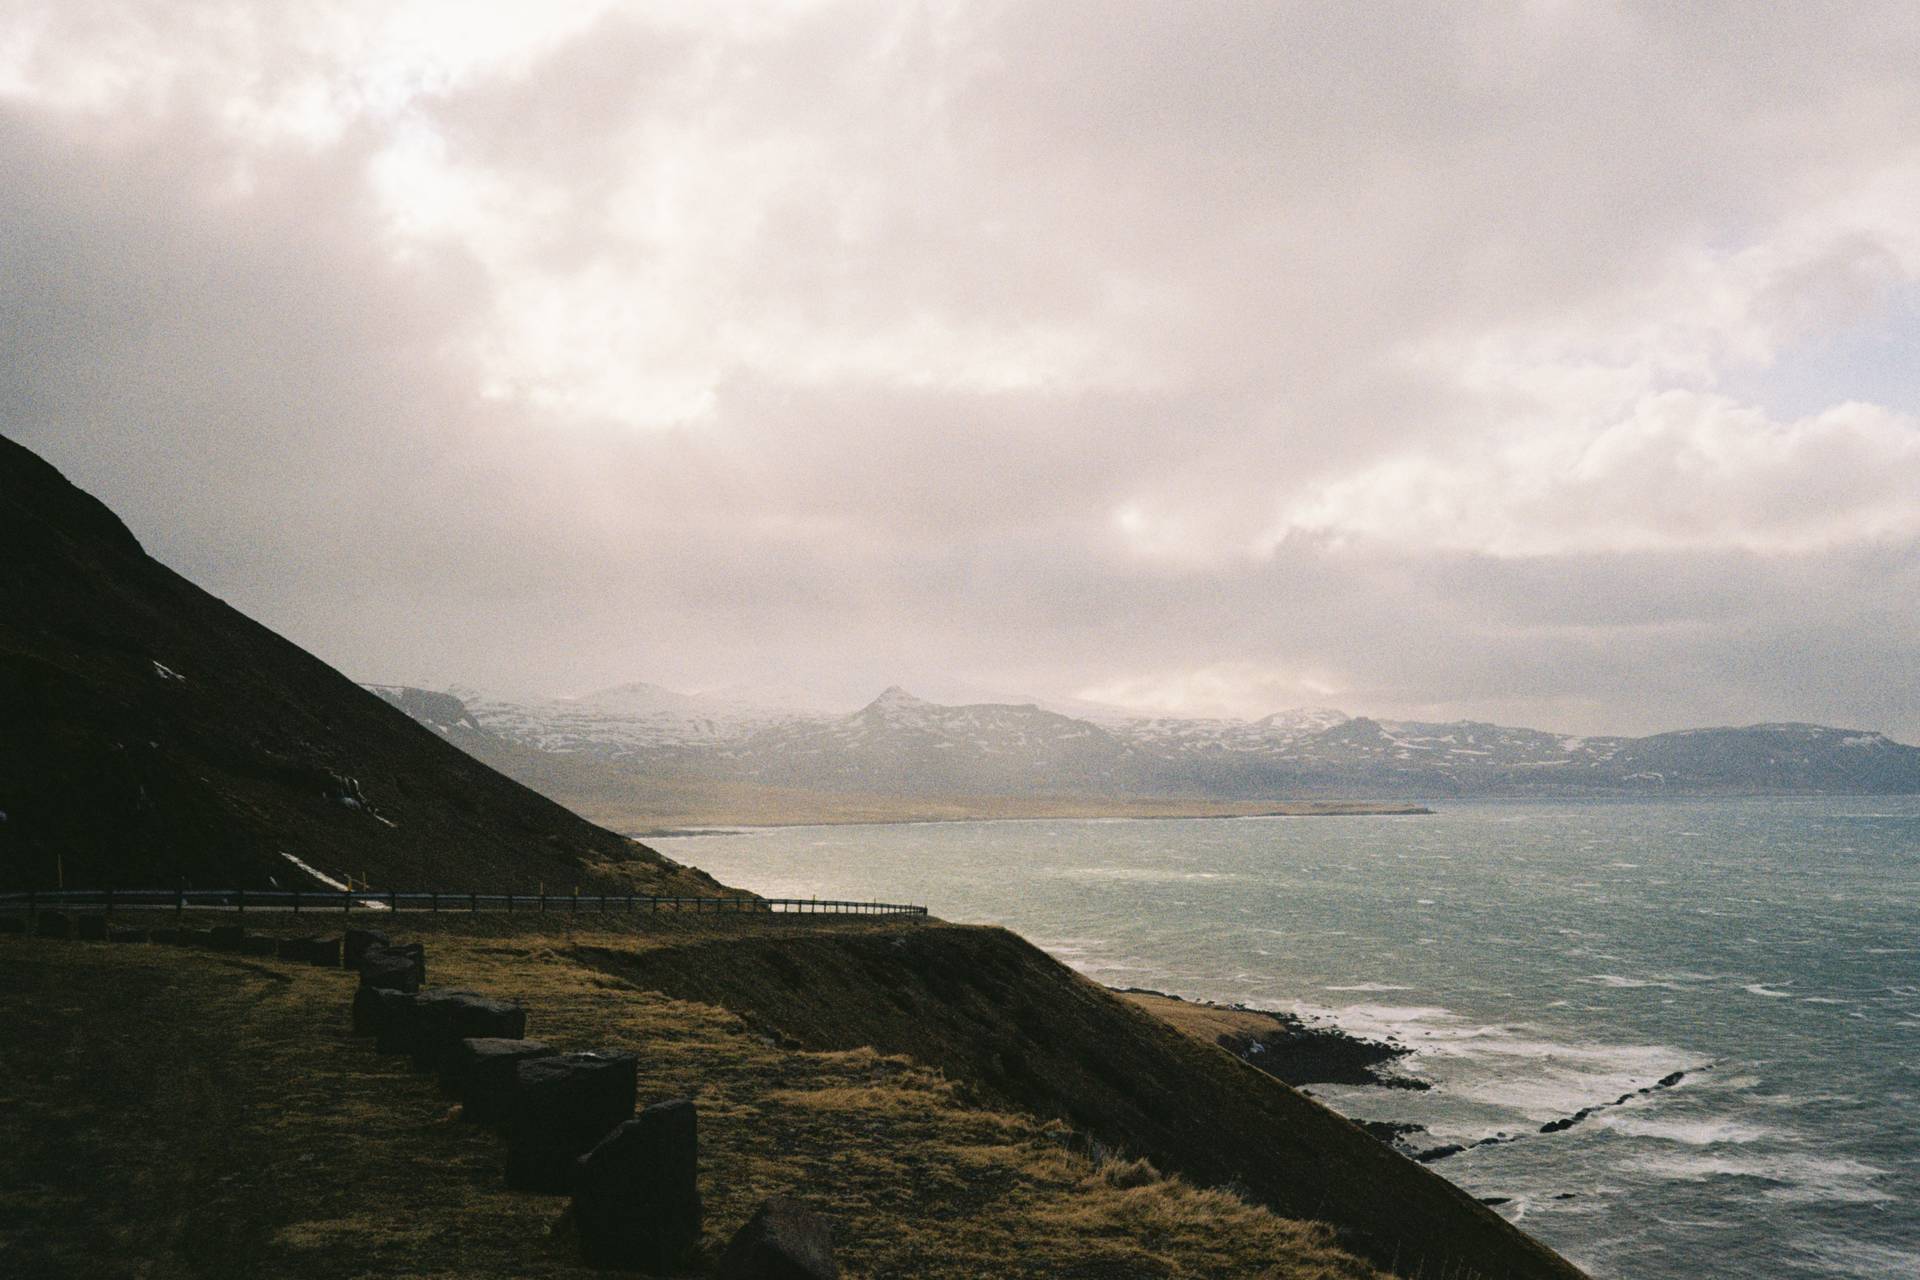 A landscape photograph of the sea, with a road in the foreground and some mountains in the background